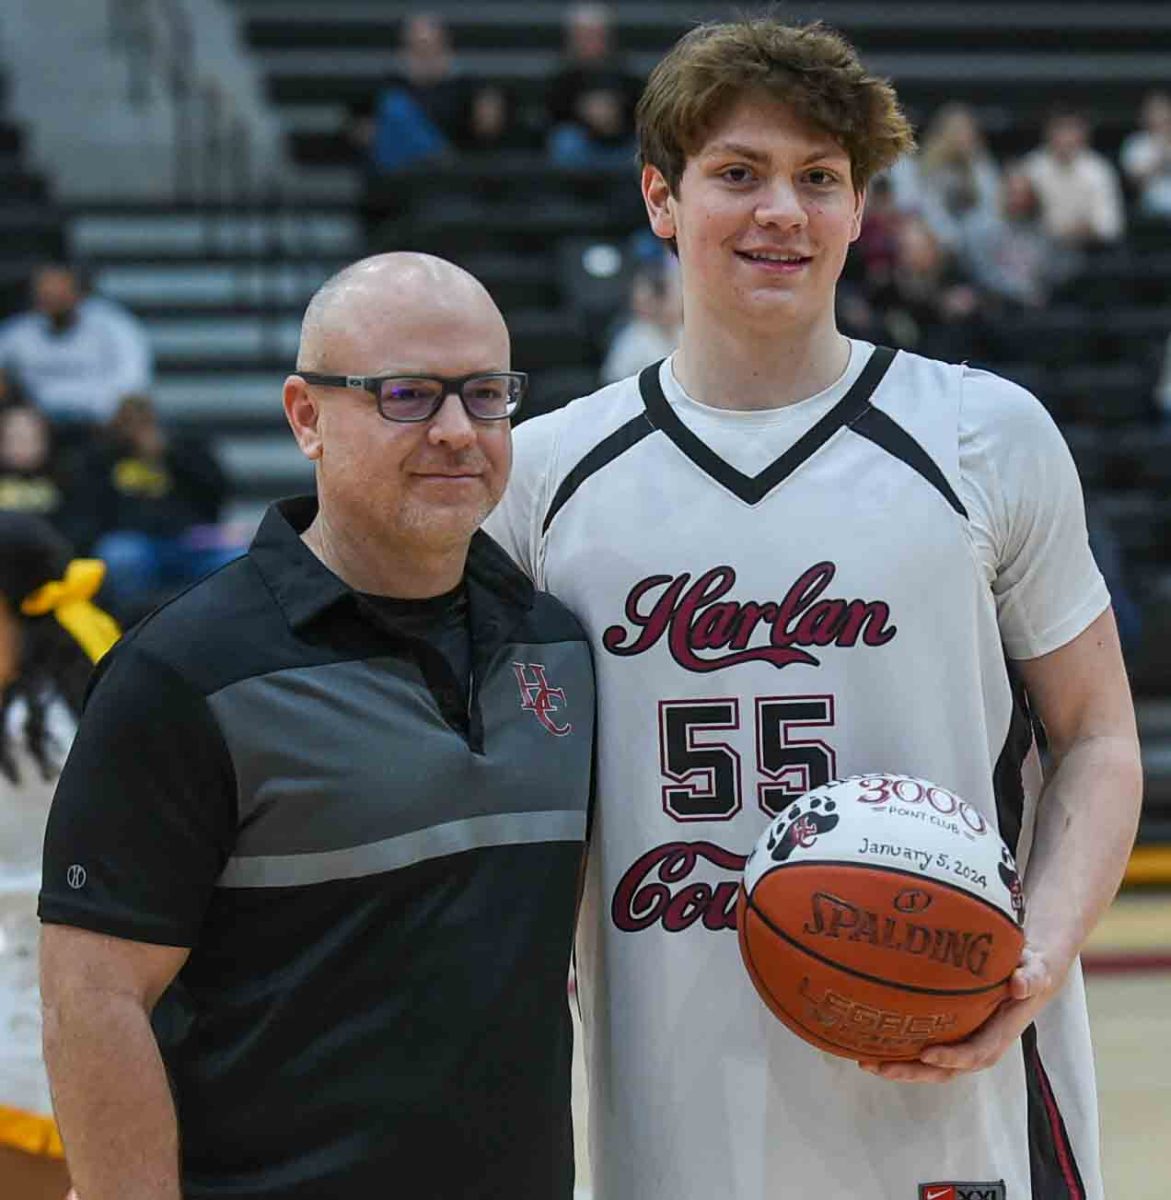 Harlan County senior guard Trent Noah was honored before the Bears game Friday against Middlesboro for reaching the 3,000-point plateau in a win over Corbin on Jan. 5. Noah has scored 3,128 points through Saturdays game against Woodford County and needs 238 points to break Charles Thomas county record. The Bears have 10 regular season games left, which means hes on pace to break the record before tournament play begins.